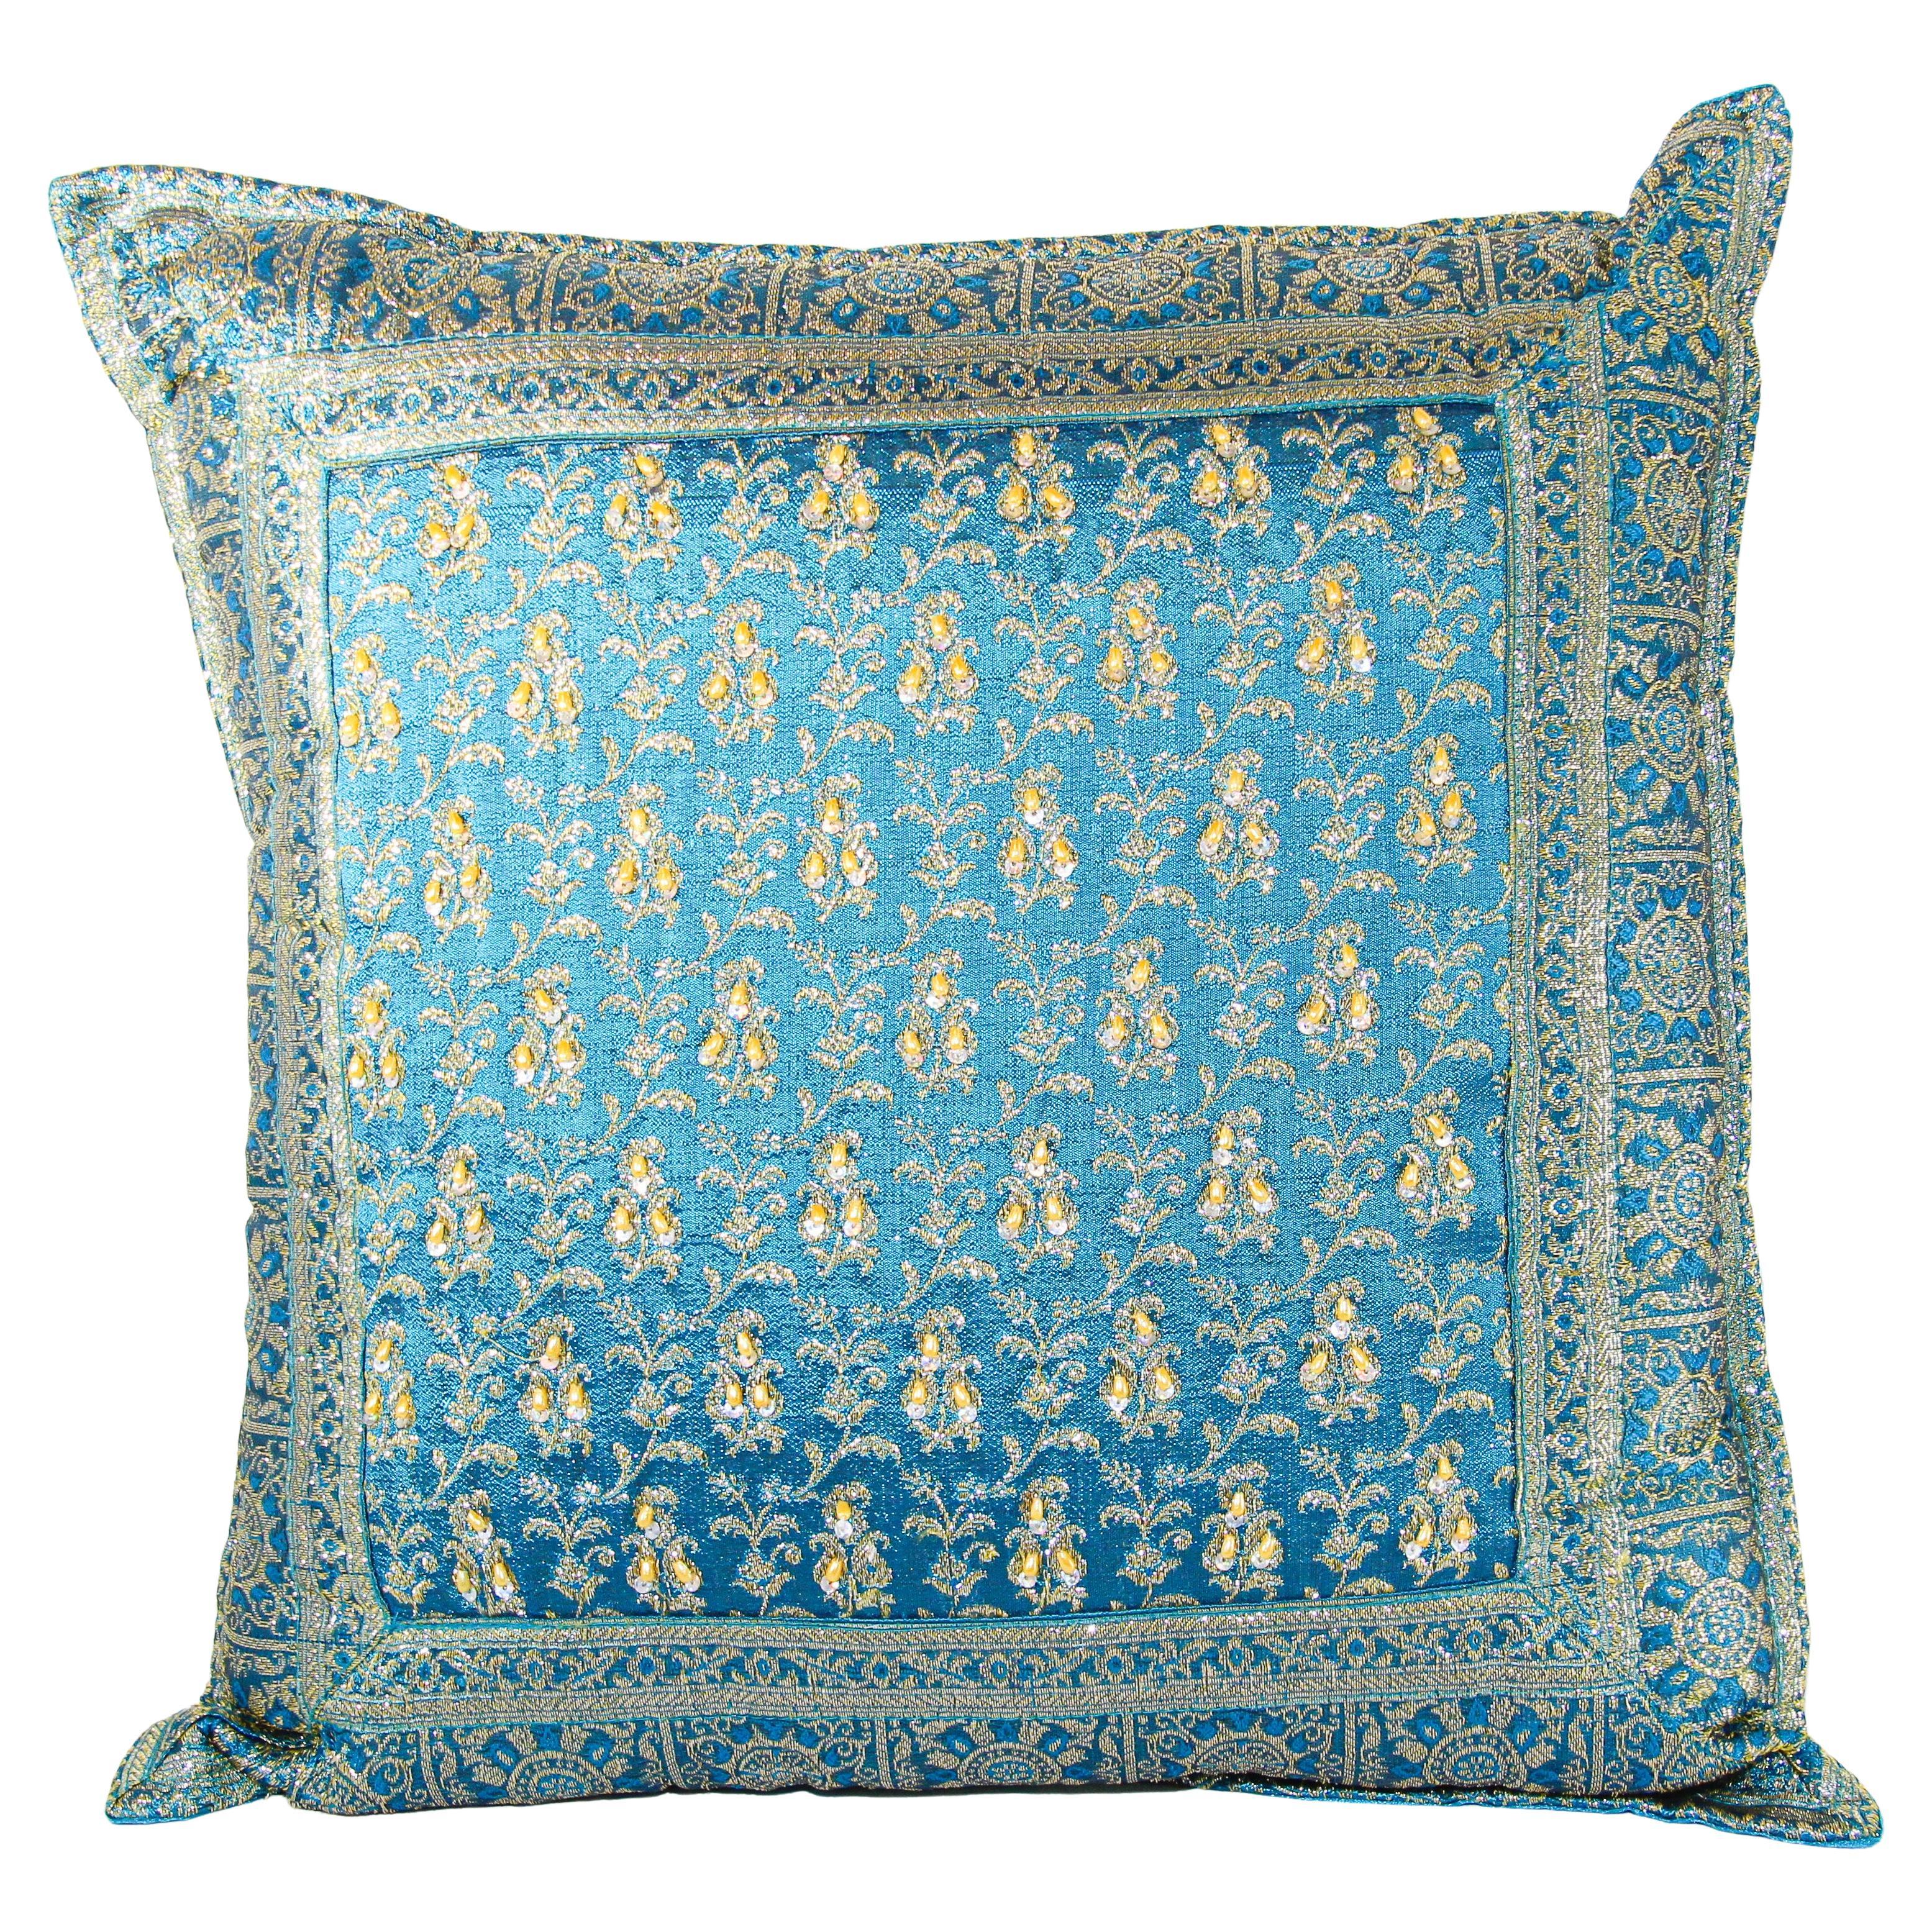 Turquoise Mughal Style Decorative Throw Pillow Embellished with Sequins and Bead